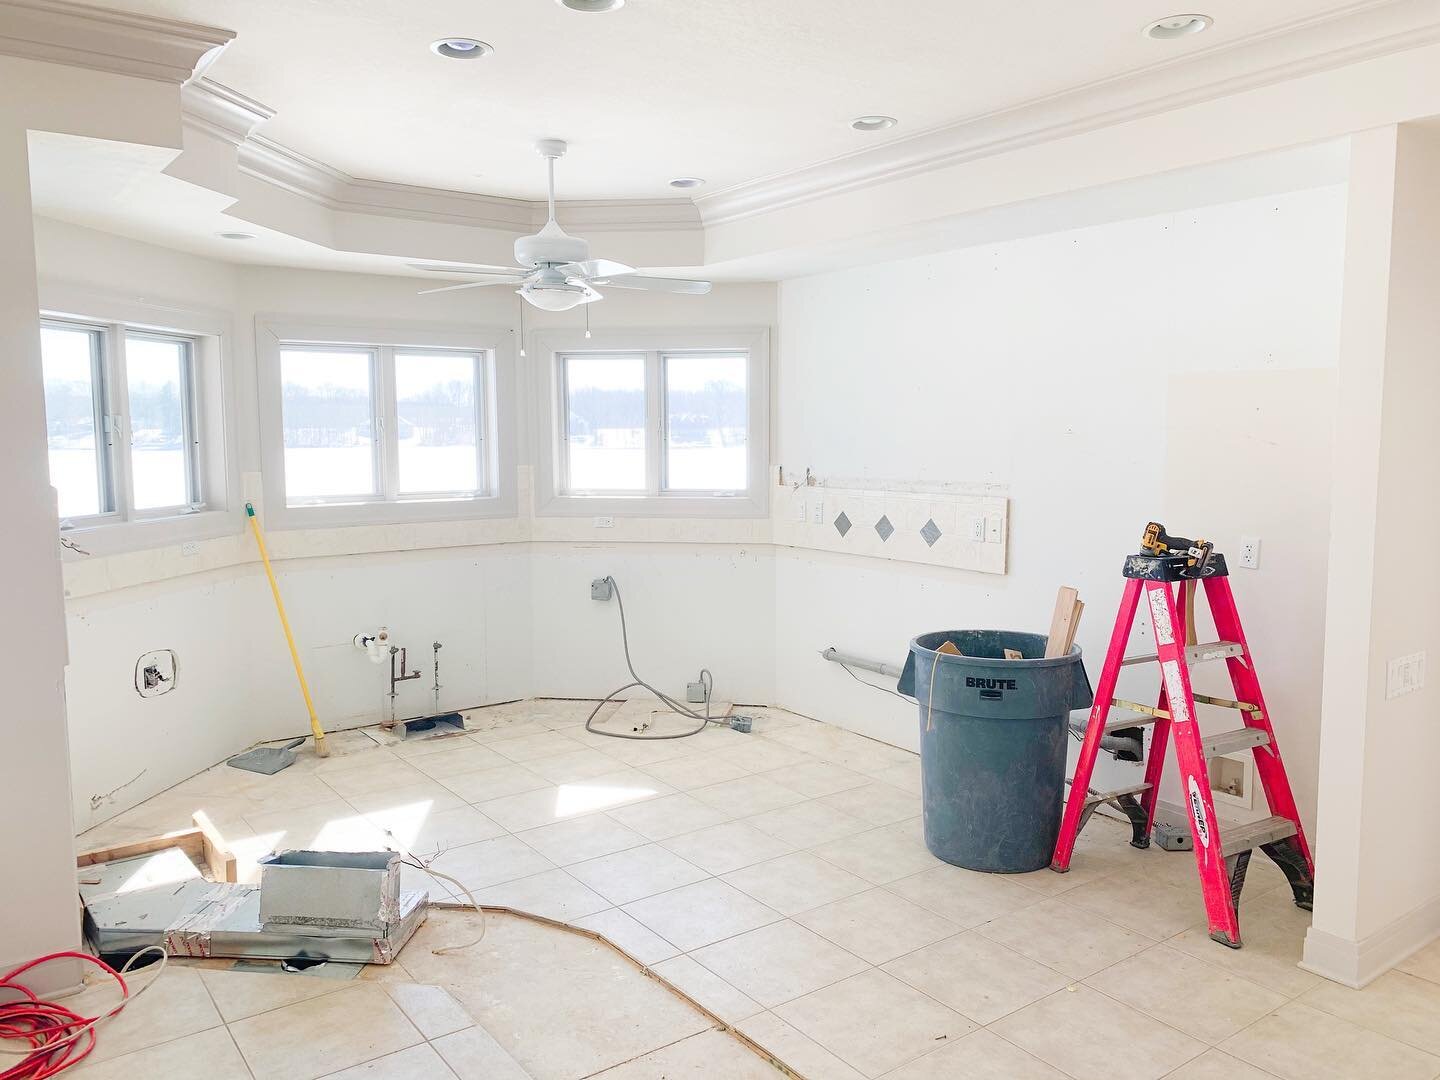 And now the kitchen is out at the #pheasantpointeproject 🎉

This reno encompasses the entire main floor of the home:
- primary bathroom
- primary closet
- primary bedroom
- kitchen
- great room
- music room
- front hall
- laundry room
- powder room
